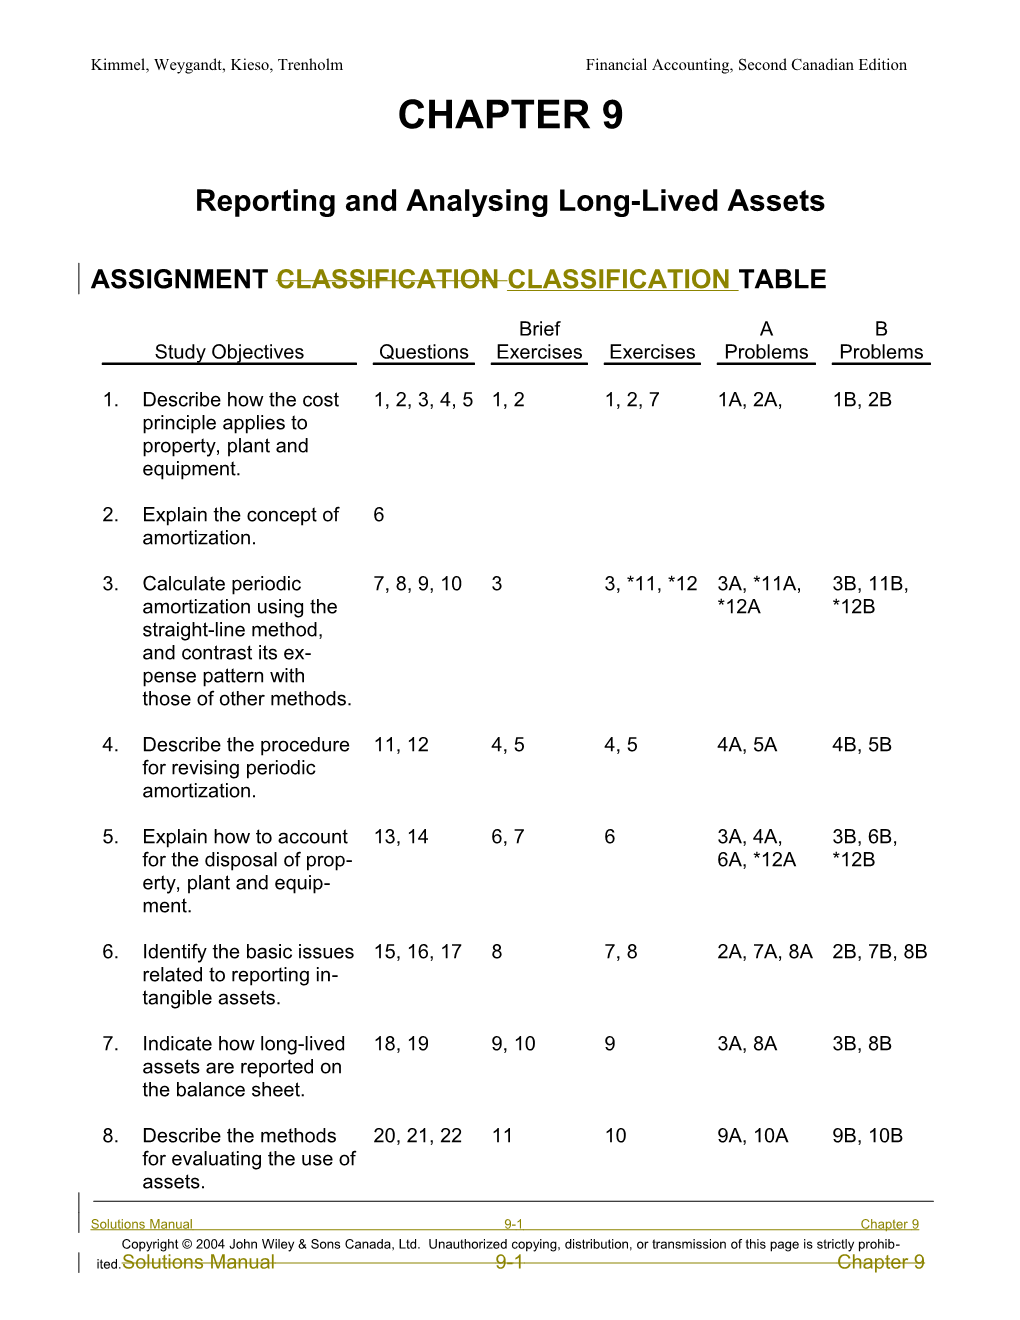 Chapter 9: Reporting And Analysing Long-Lived Assets